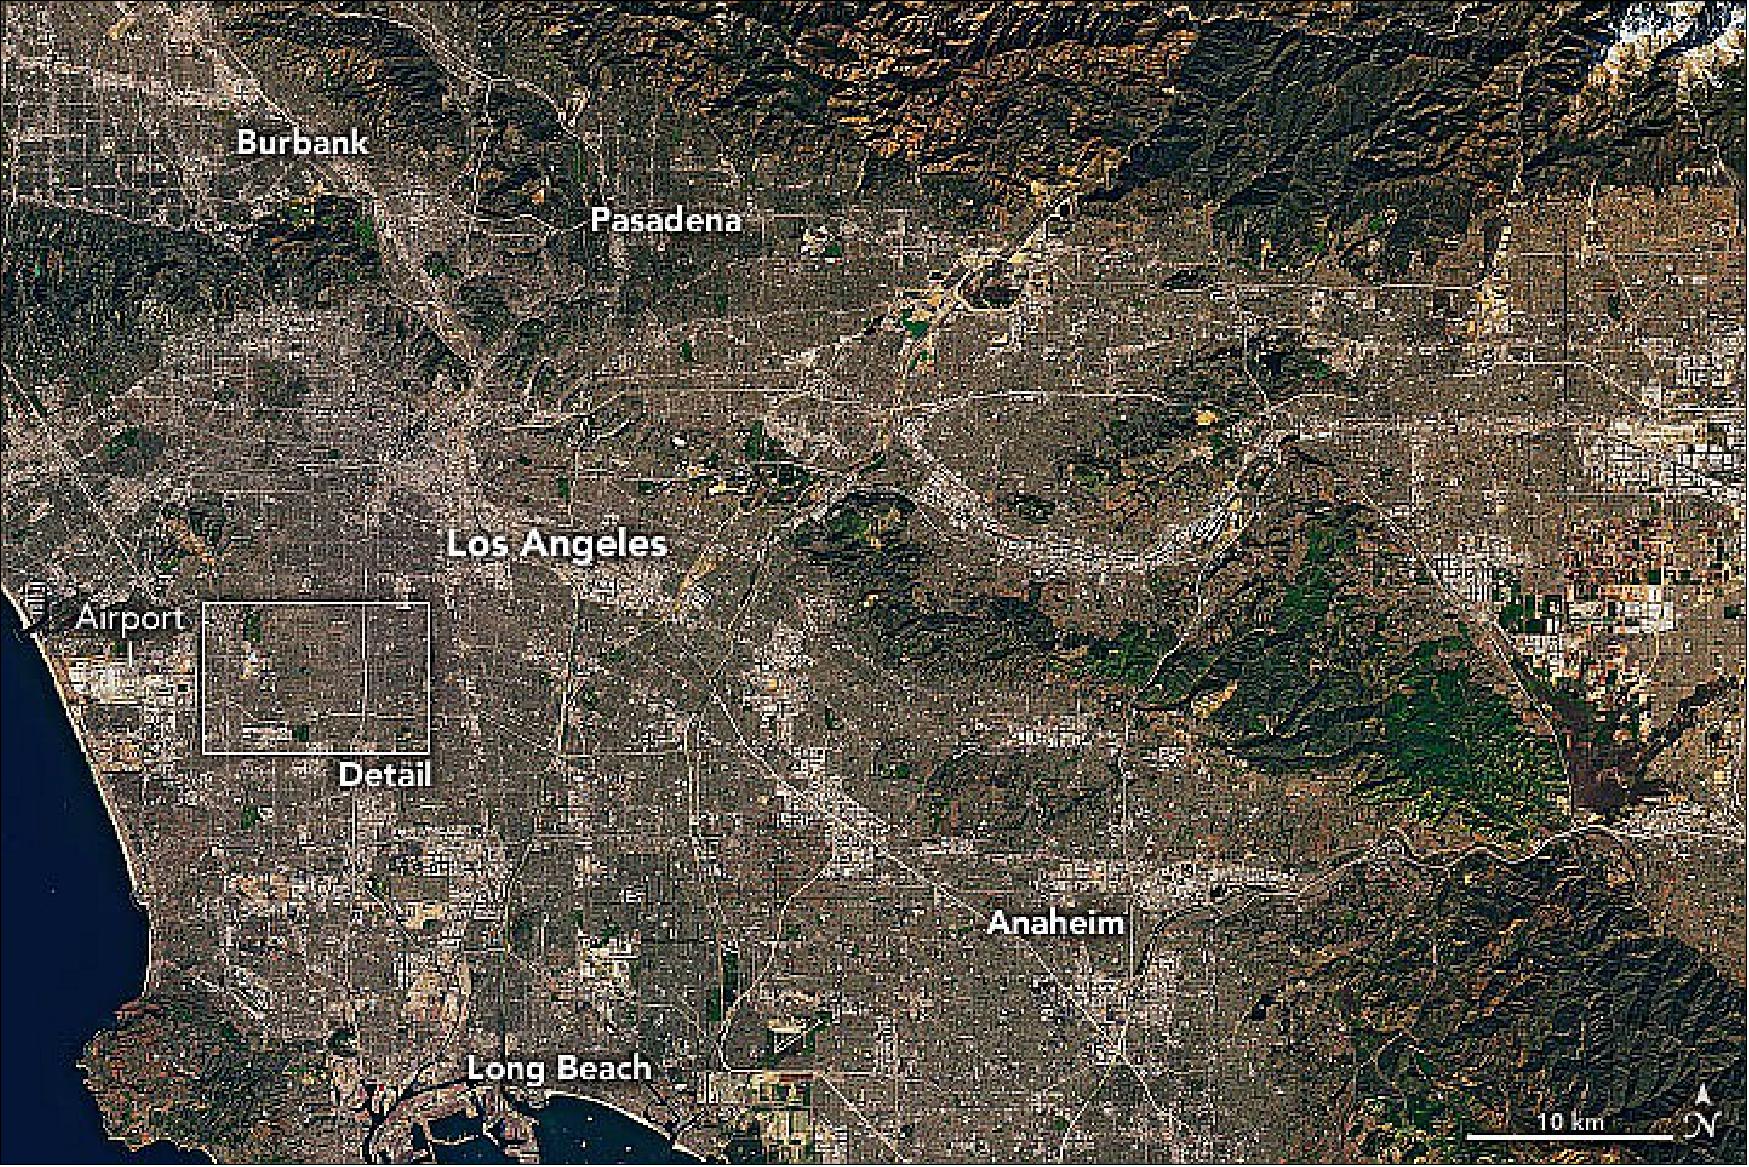 Figure 45: On February 7, 2022, the Operational Land Imager-2 (OLI-2) on Landsat-9 acquired these natural-color views of the Los Angeles area. The Super Bowl, the championship of American football, will be played in SoFi Stadium in Inglewood, California. It will be the eighth time the Los Angeles area has hosted the Super Bowl, but the first since 1993 (image credit: NASA Earth Observatory images by Joshua Stevens, using Landsat data from the U.S. Geological Survey. Story by Michael Carlowicz)